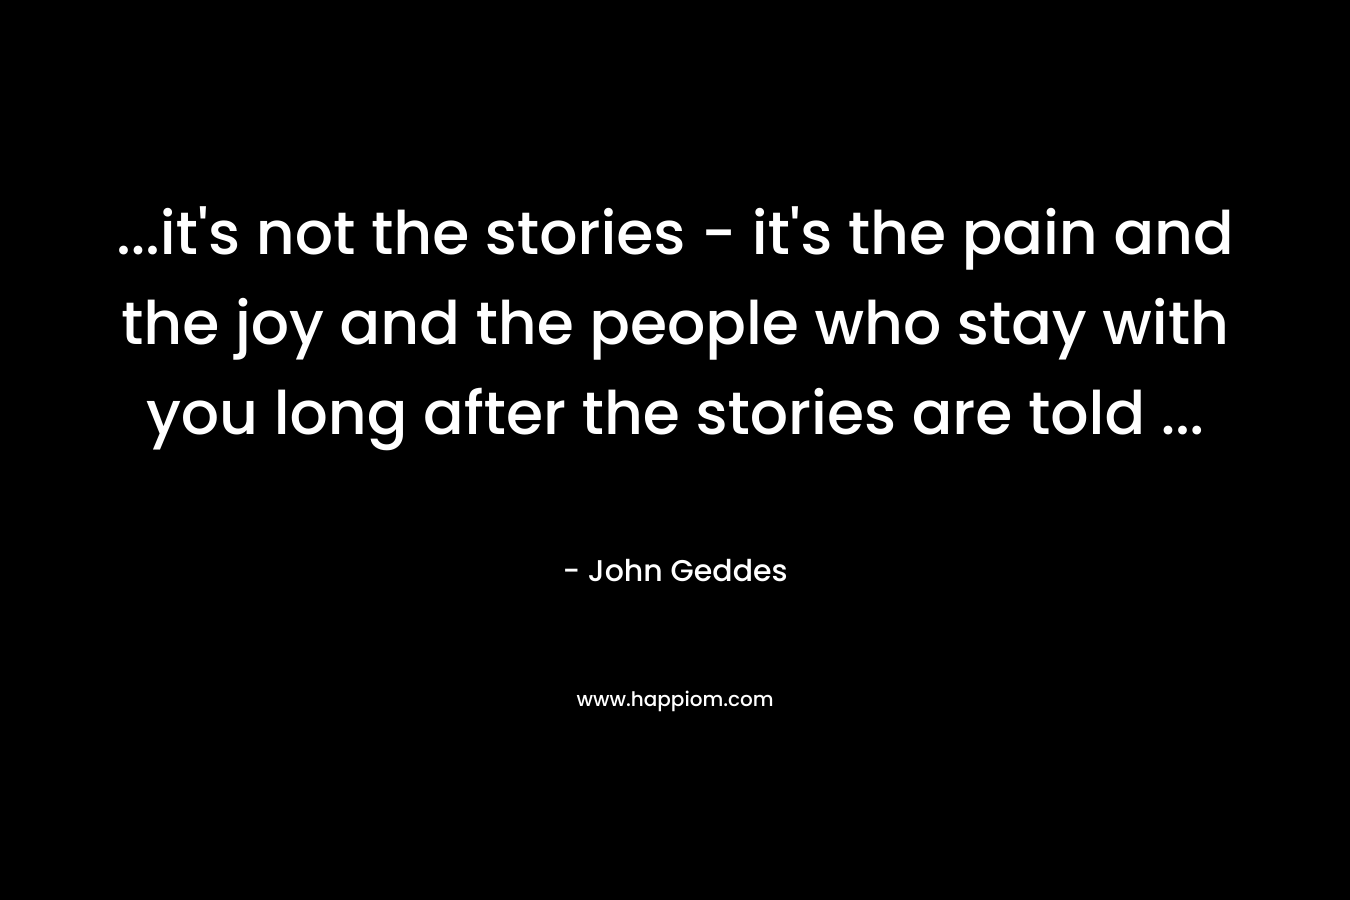 ...it's not the stories - it's the pain and the joy and the people who stay with you long after the stories are told ...